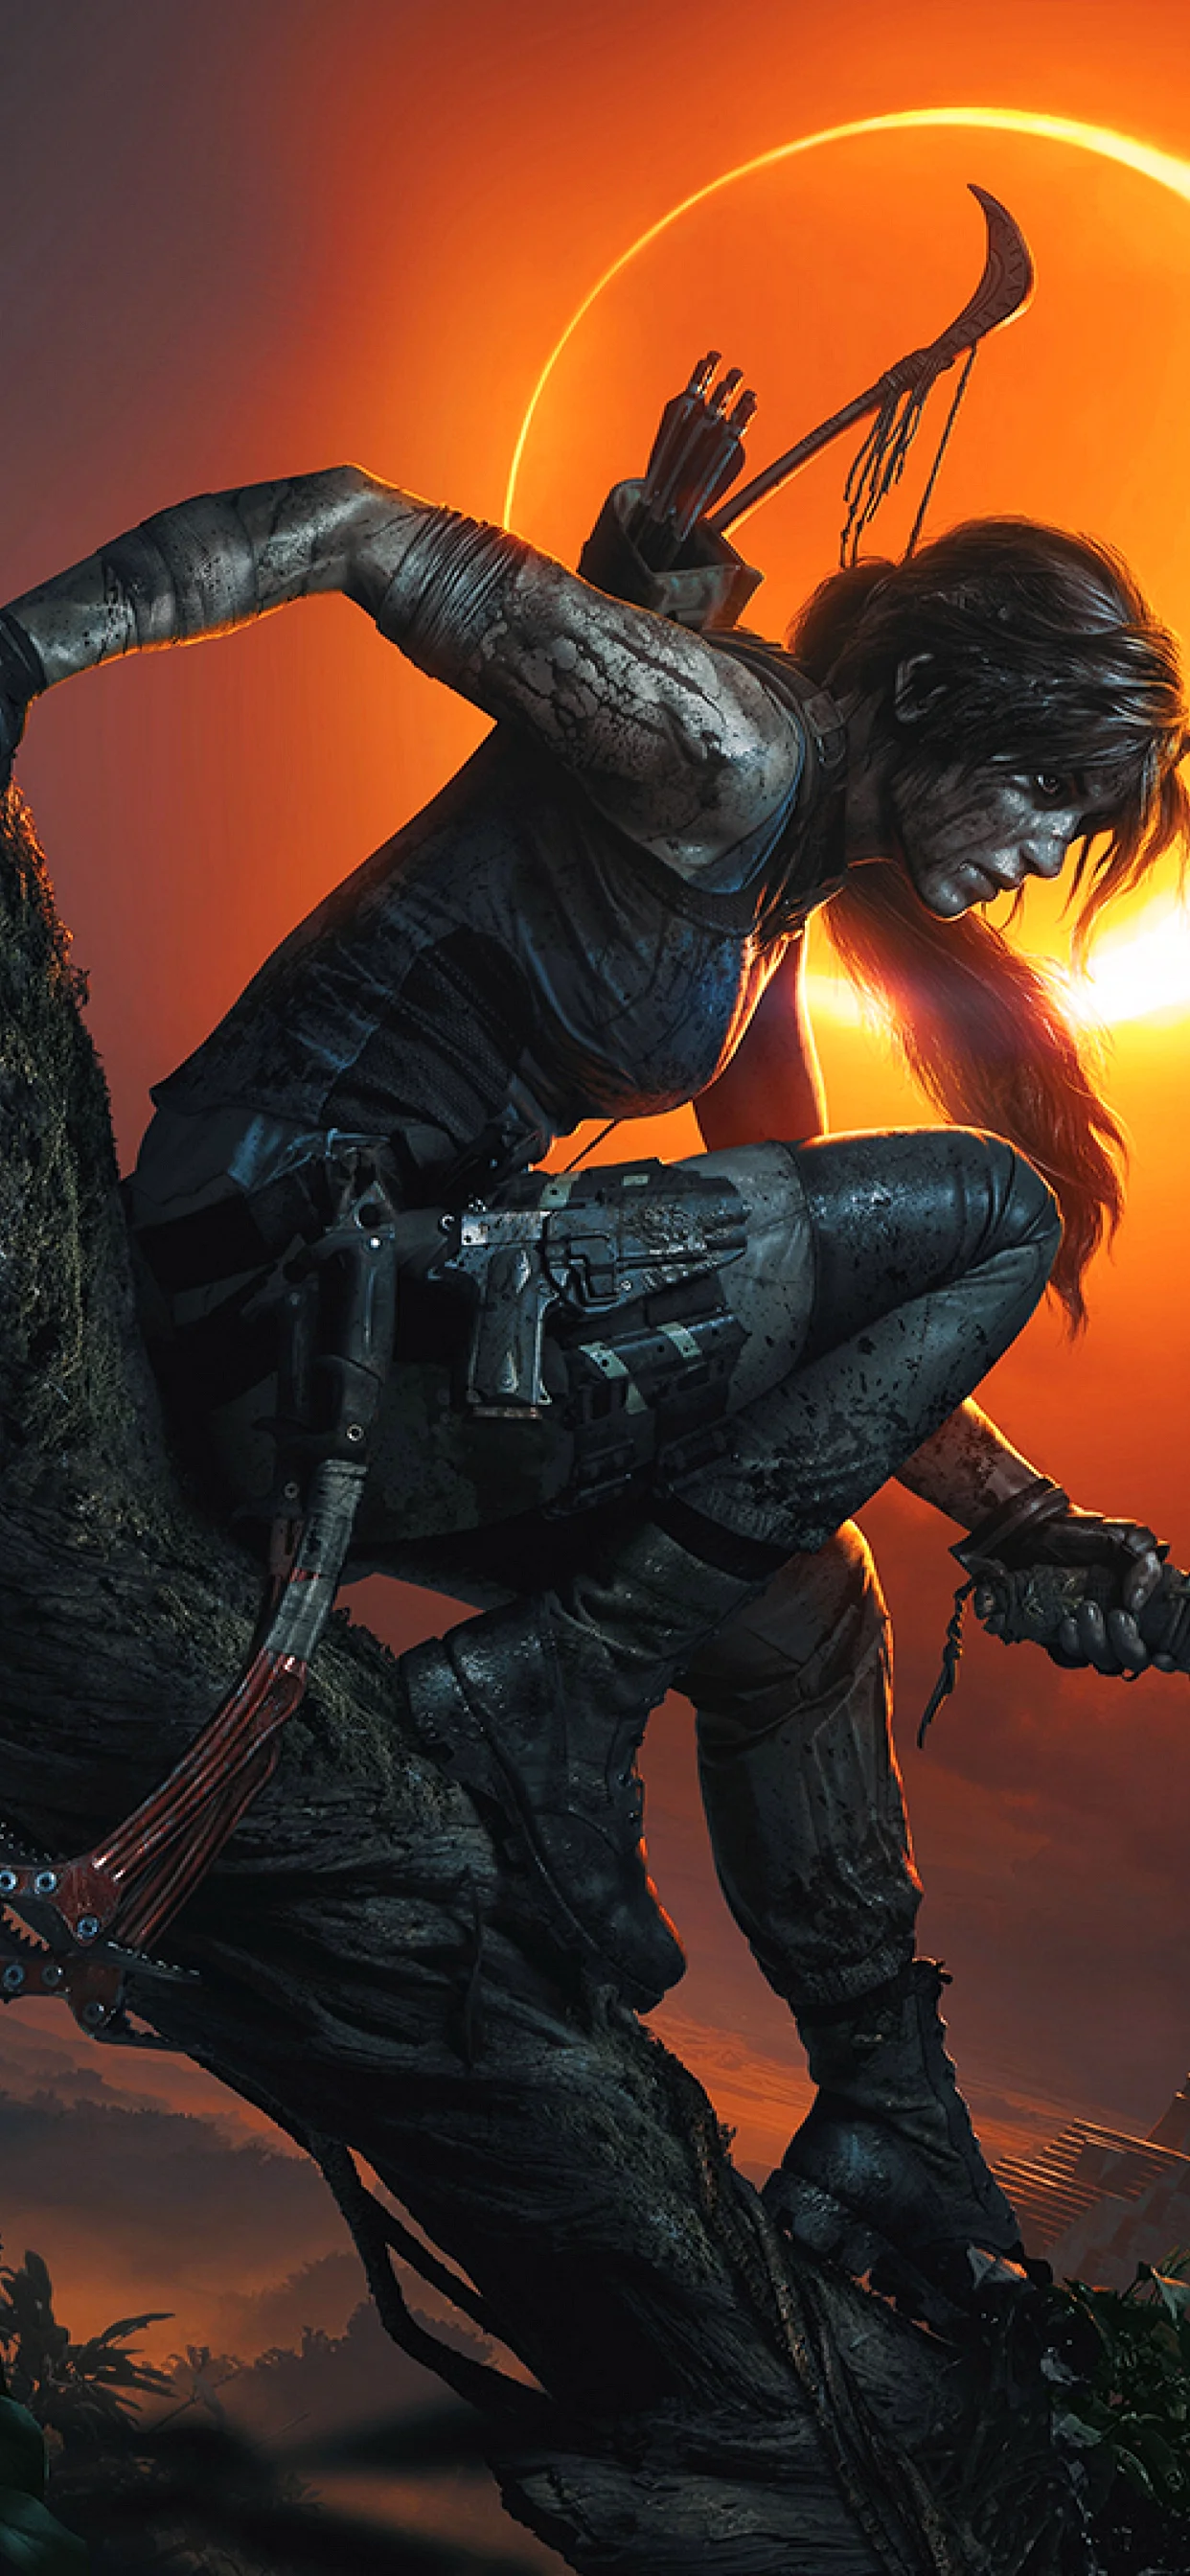 Shadow Of The Tomb Raider Wallpaper for iPhone 11 Pro Max